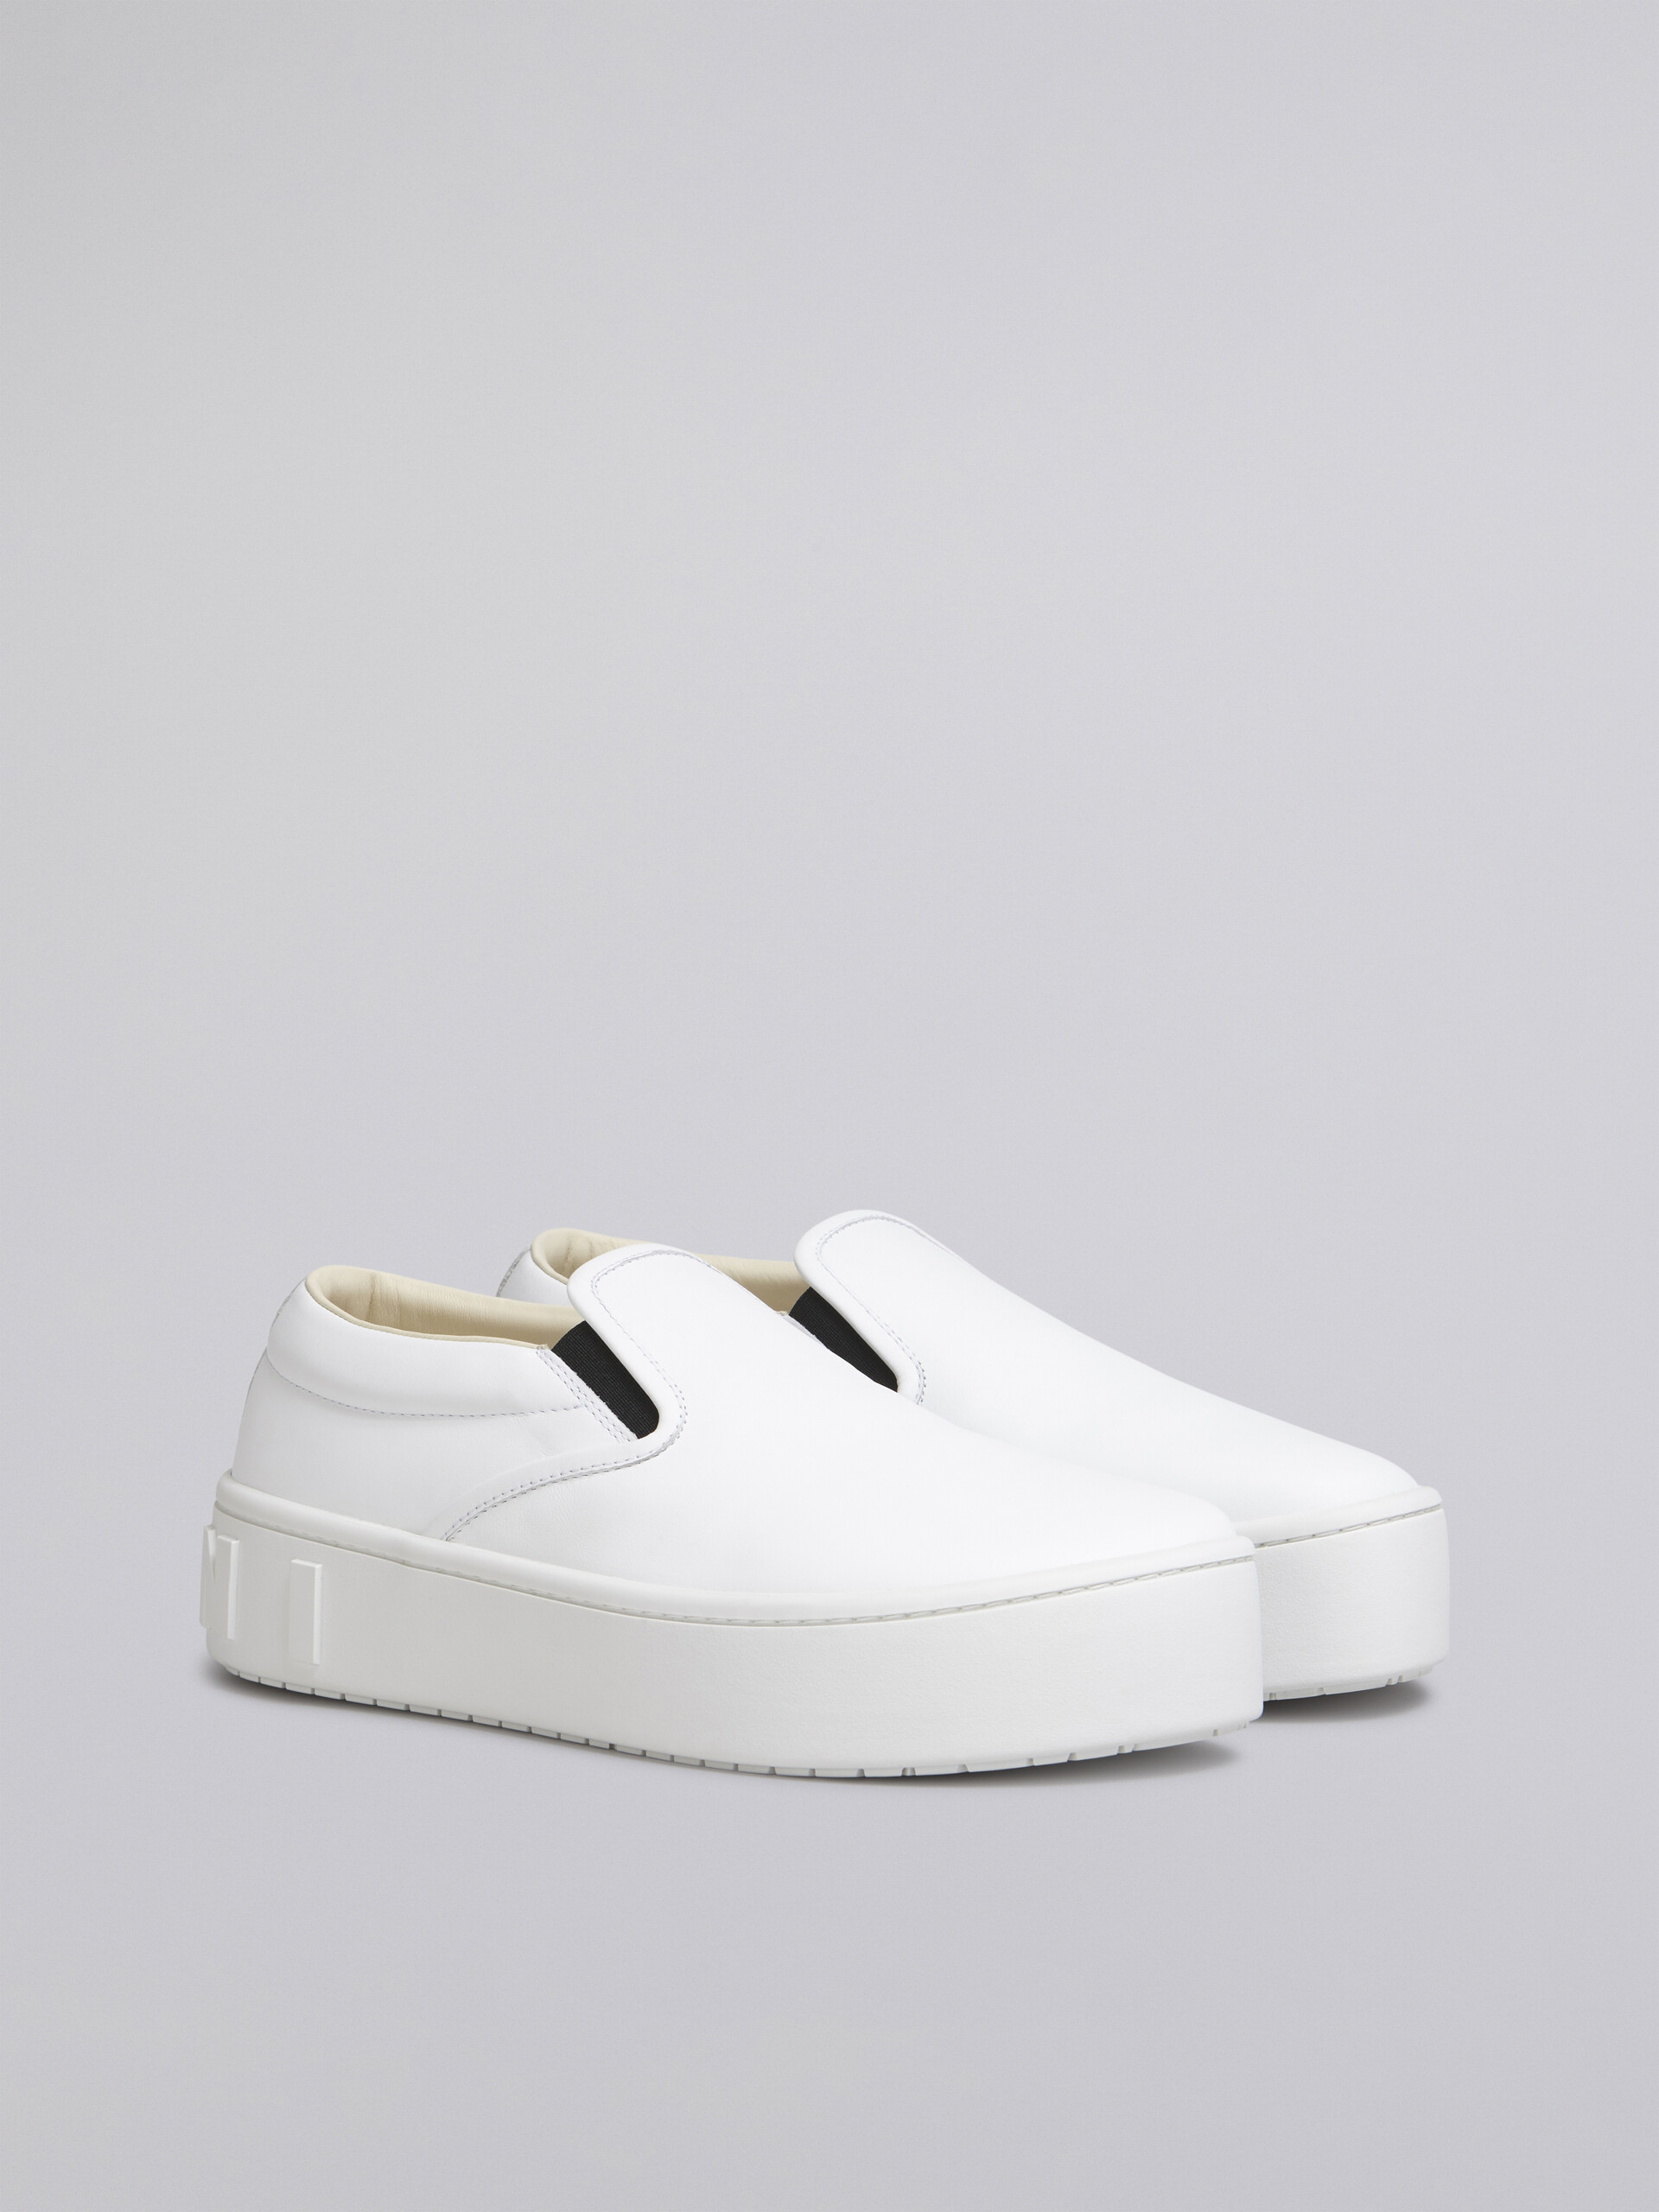 Calfskin slip-on sneaker with maxi logo on the heel - Sneakers - Image 2